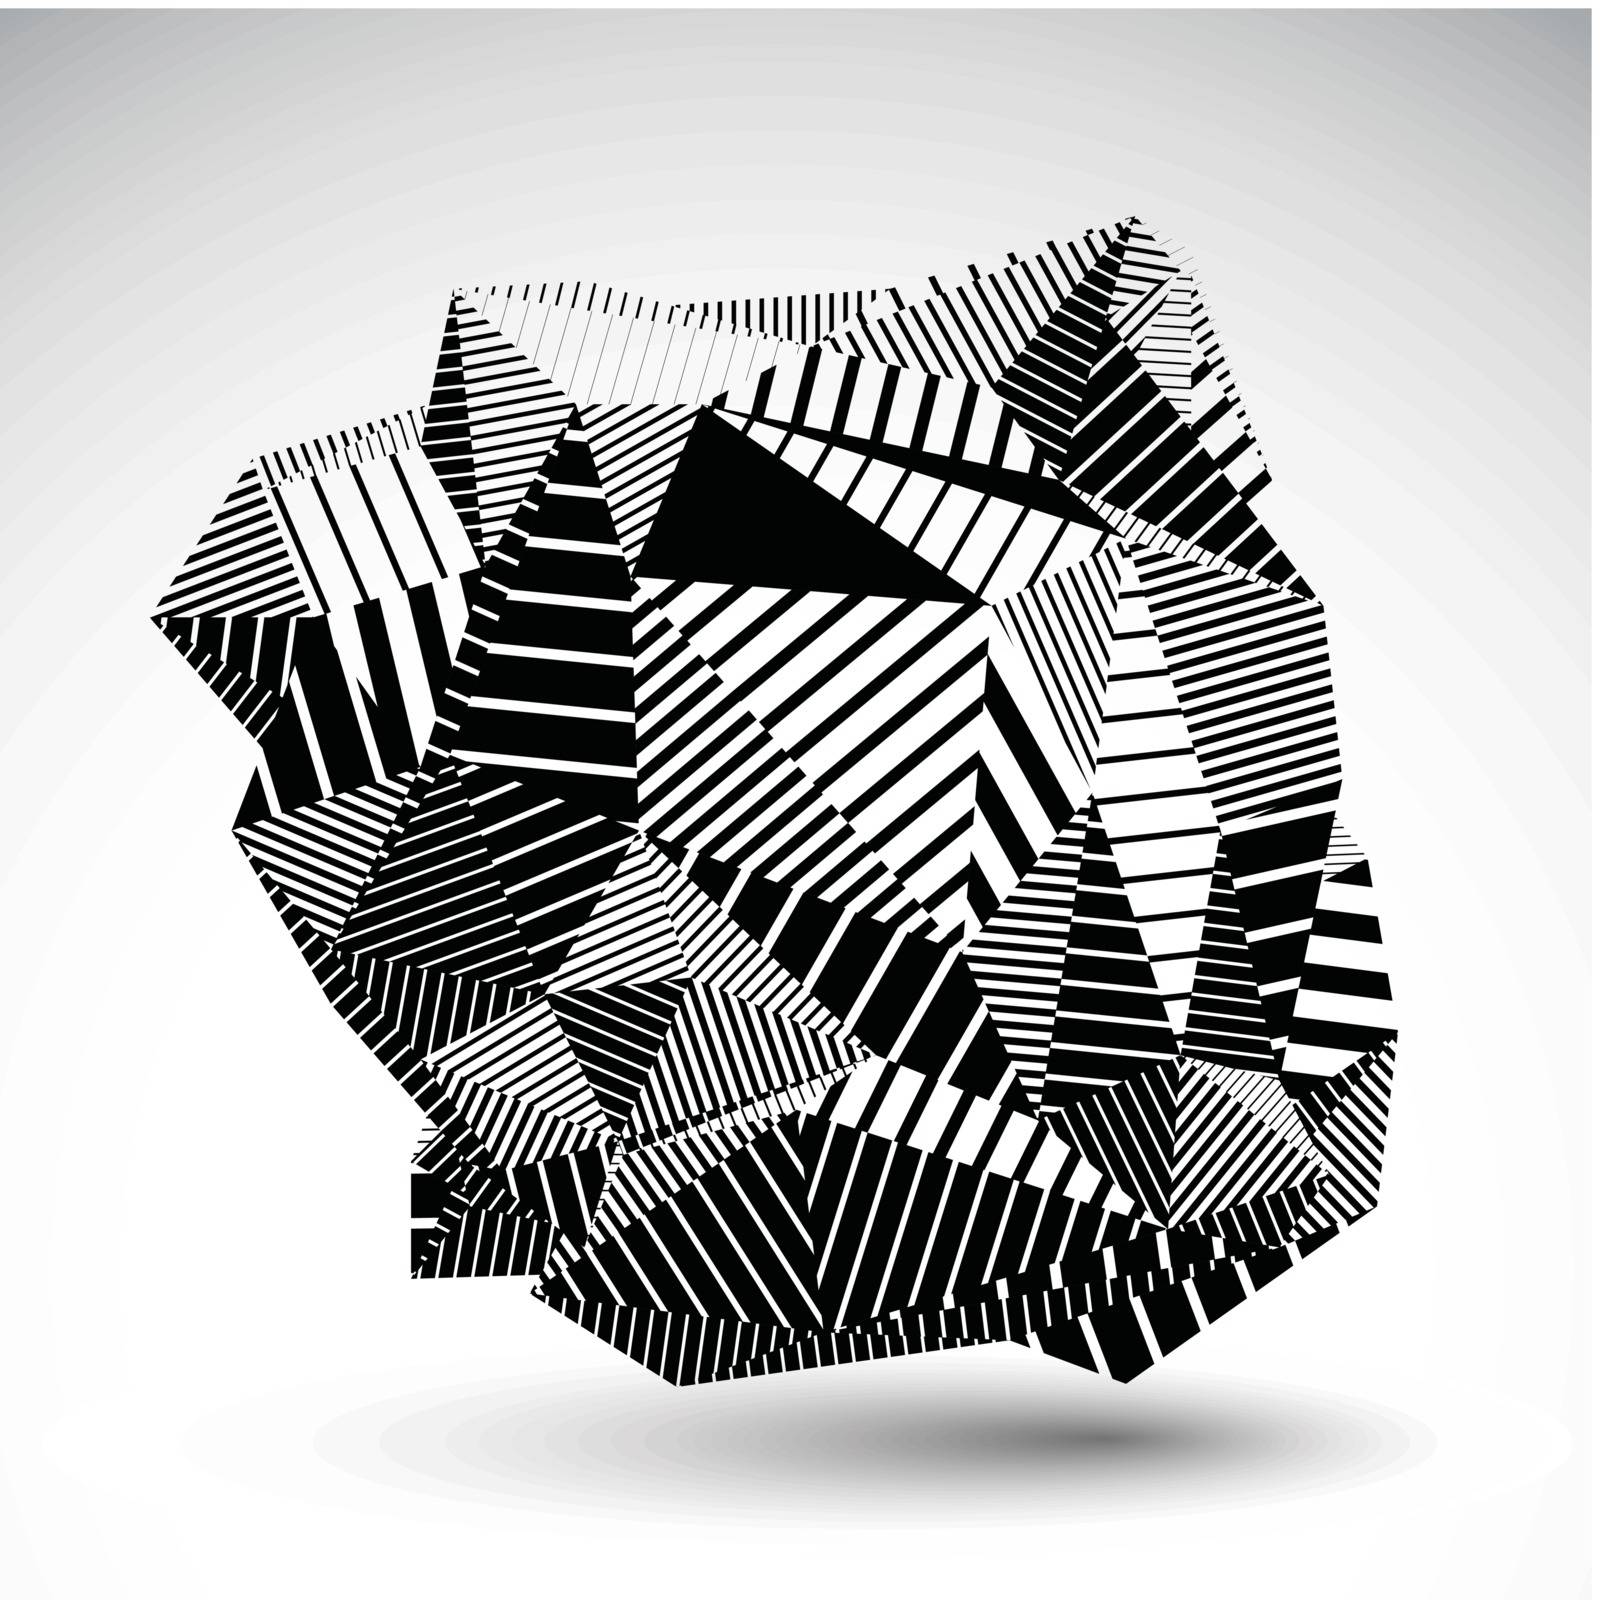 Decorative complicated unusual eps8 figure constructed from triangles with parallel black lines. Striped multifaceted asymmetric contrast element, monochrome illustration for technology projects.